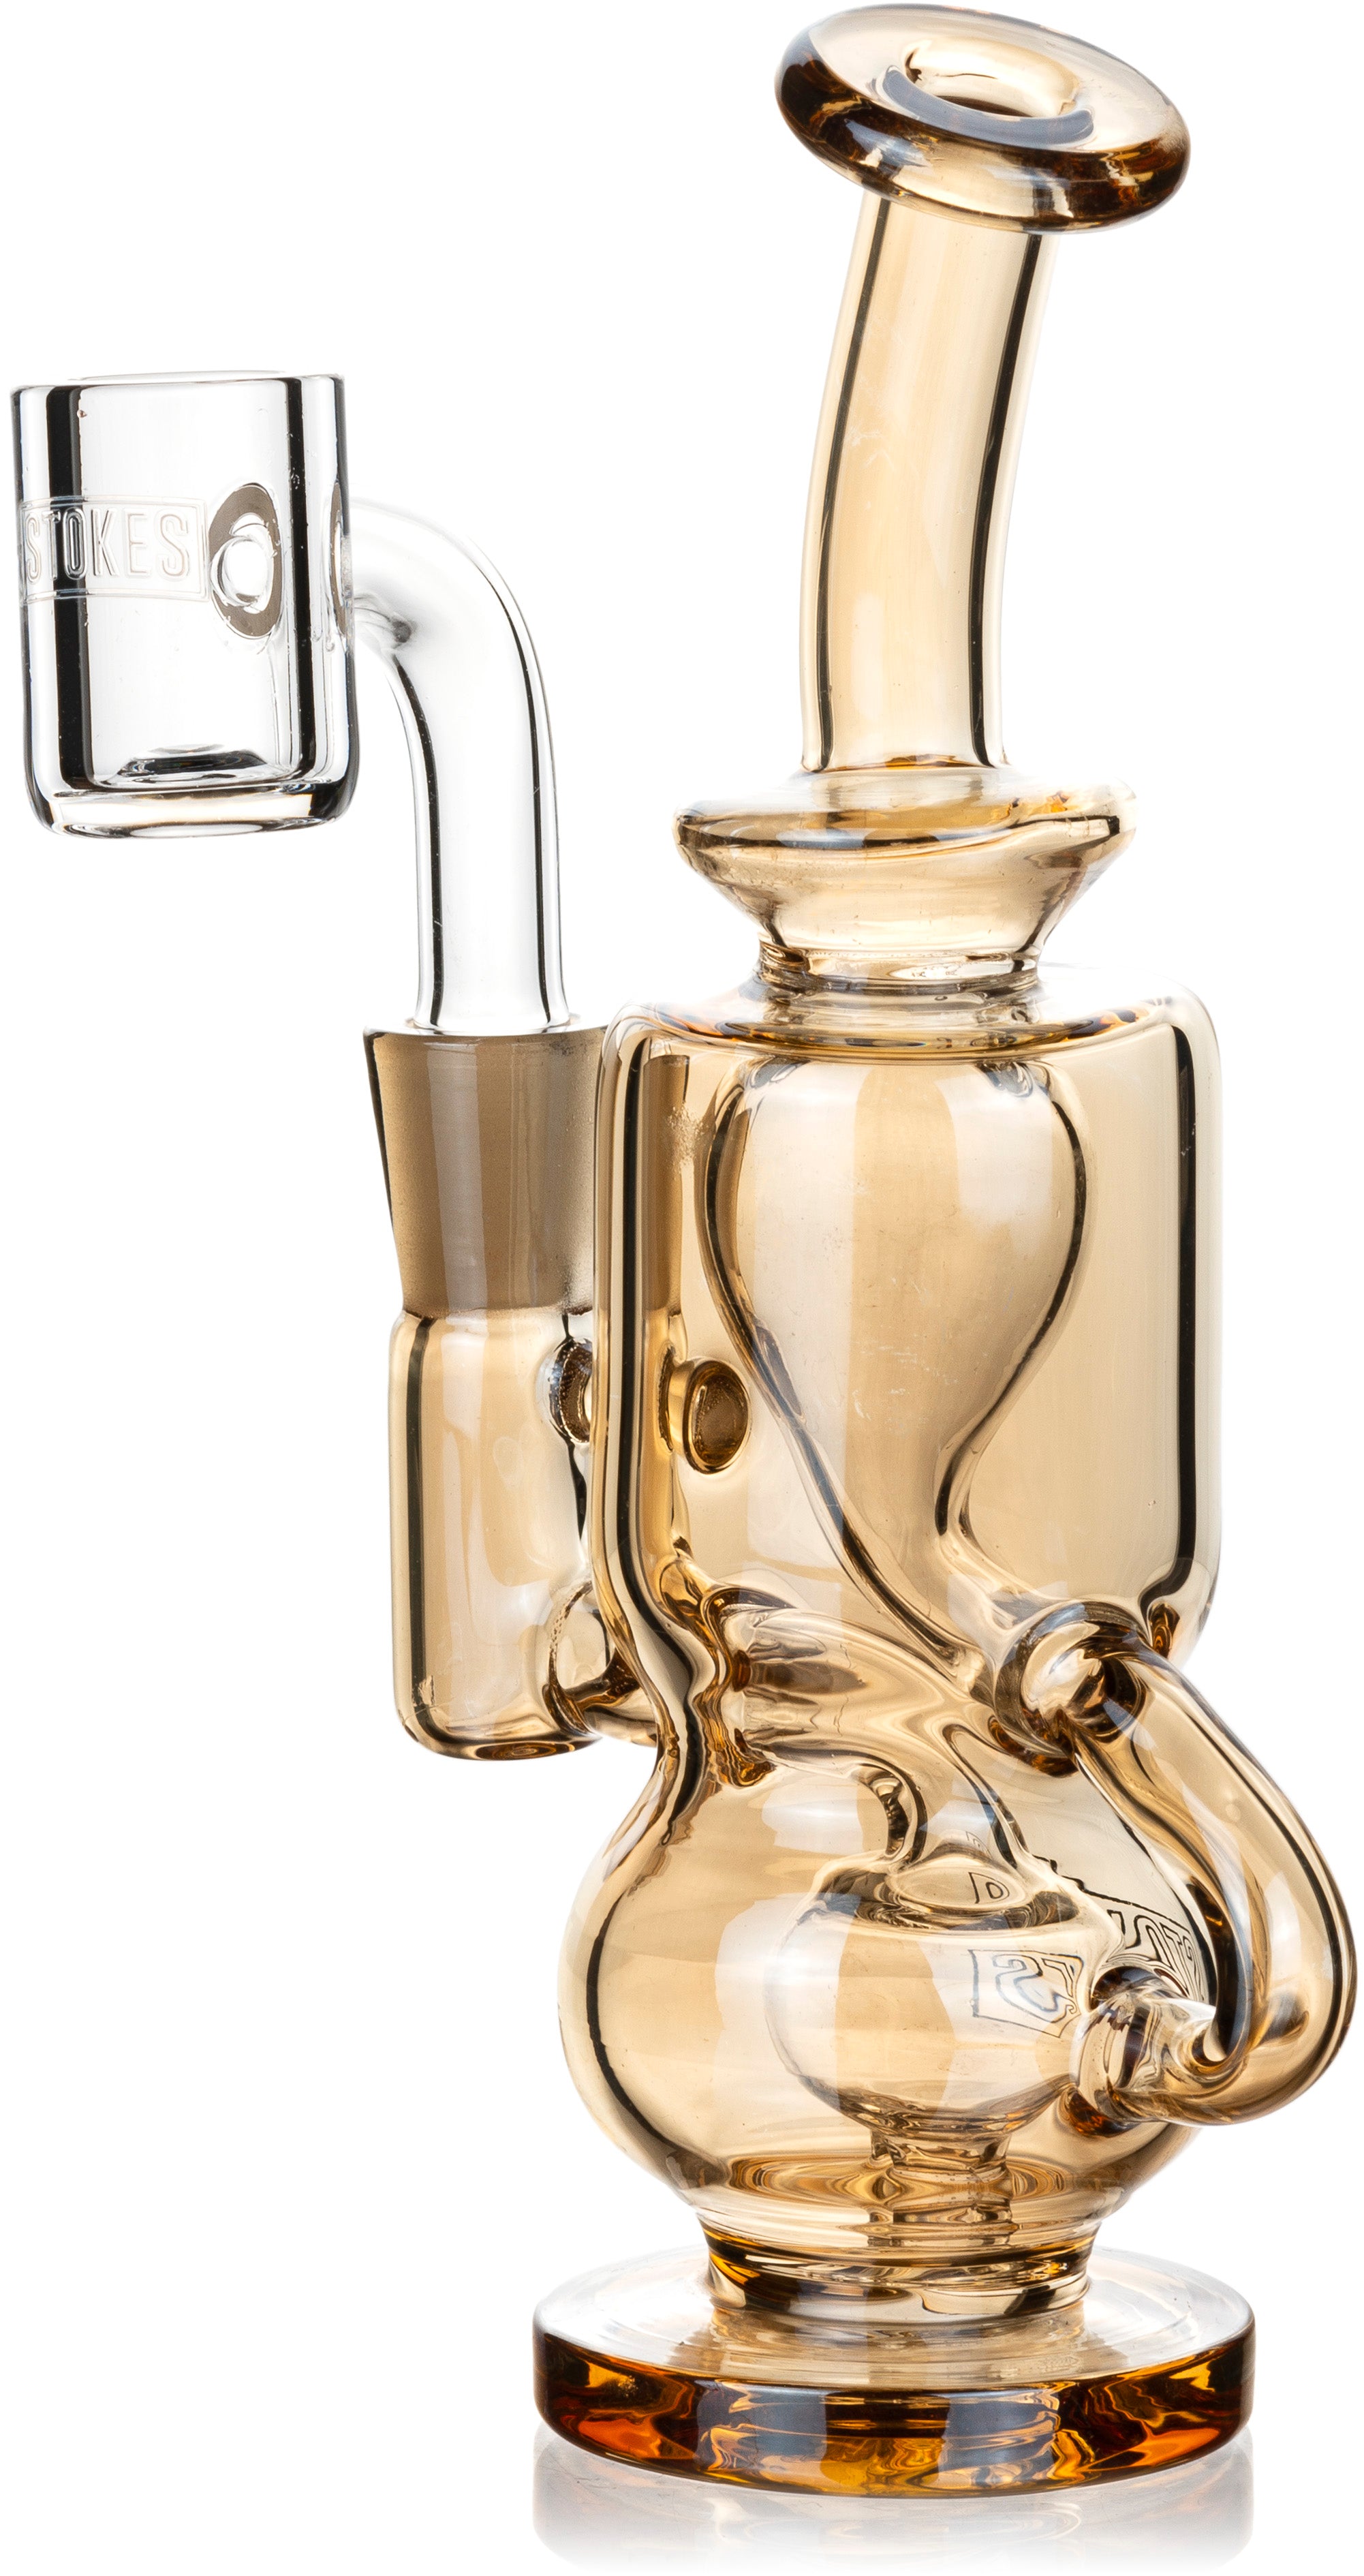 6 Pluto Dab Rig, by Stokes Glass (free banger included) – BKRY Inc.